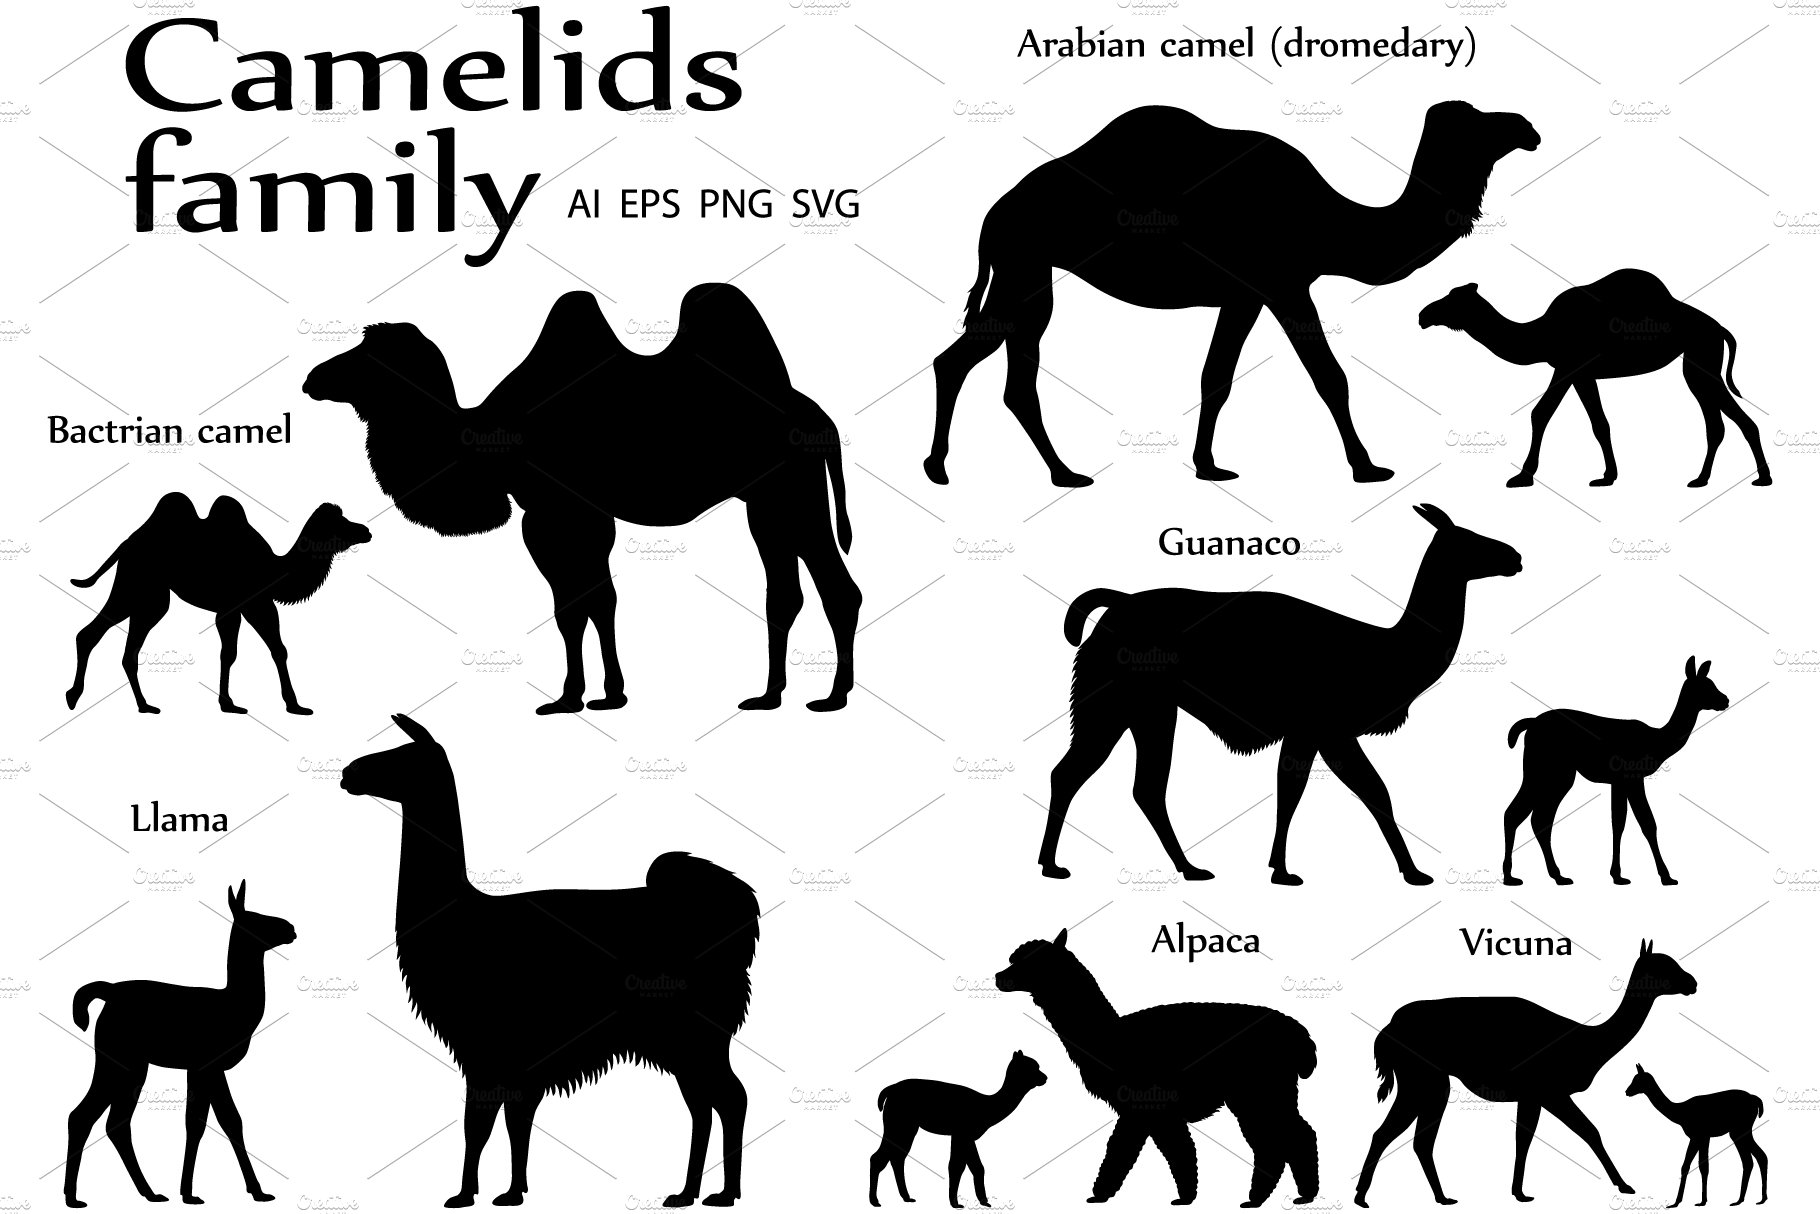 Camelids family silhouette cover image.